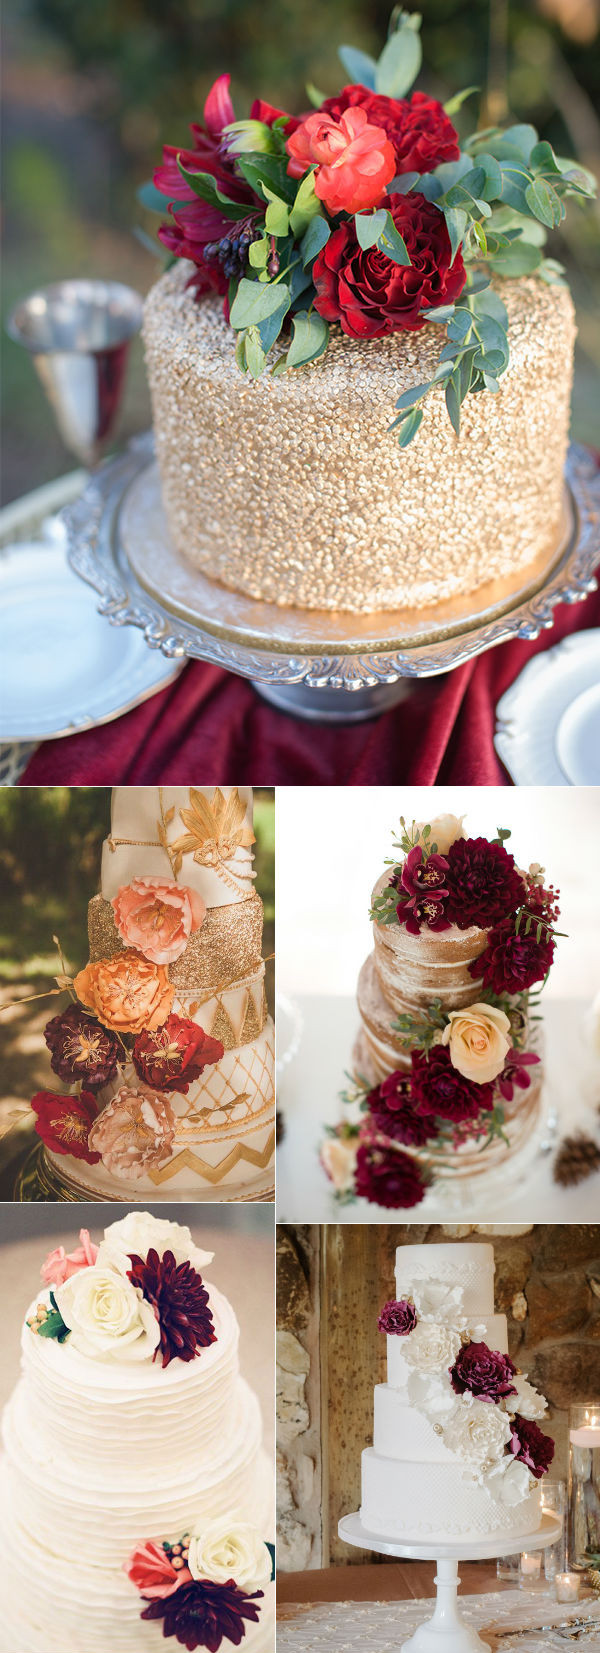 Fall Cakes Ideas
 32 Amazing Wedding Cakes Perfect For Fall